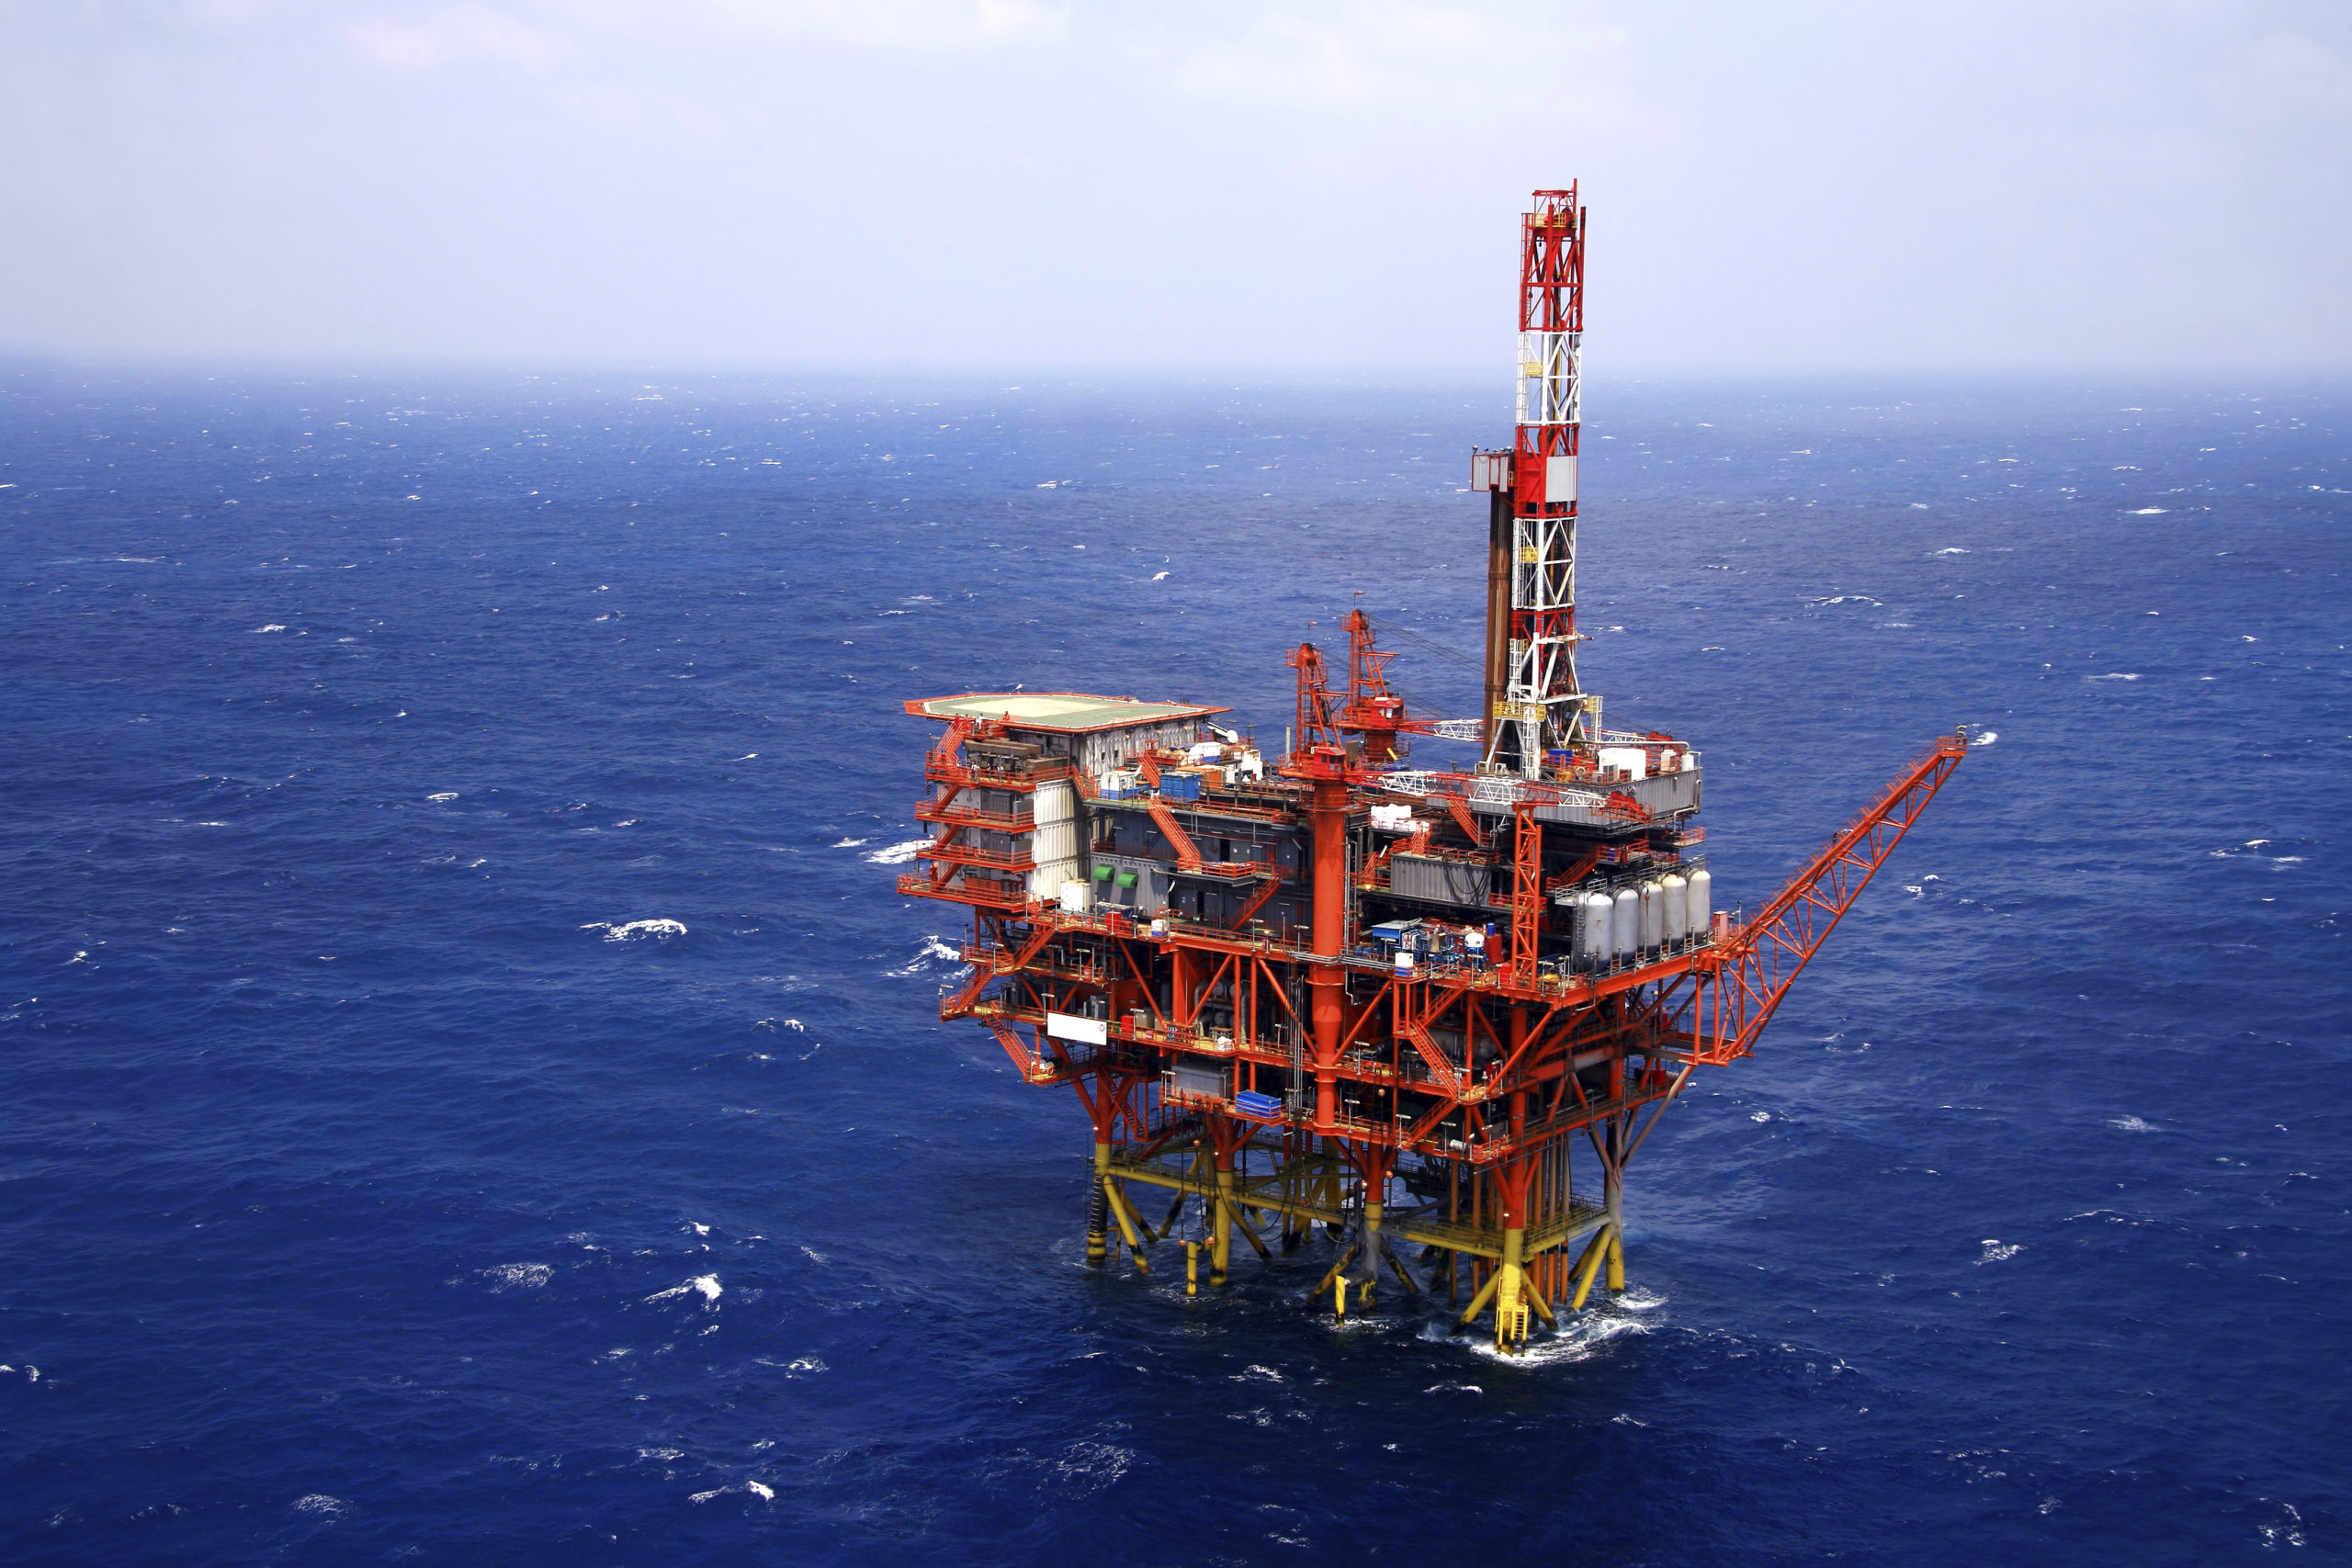 Introduction to offshore platform operations